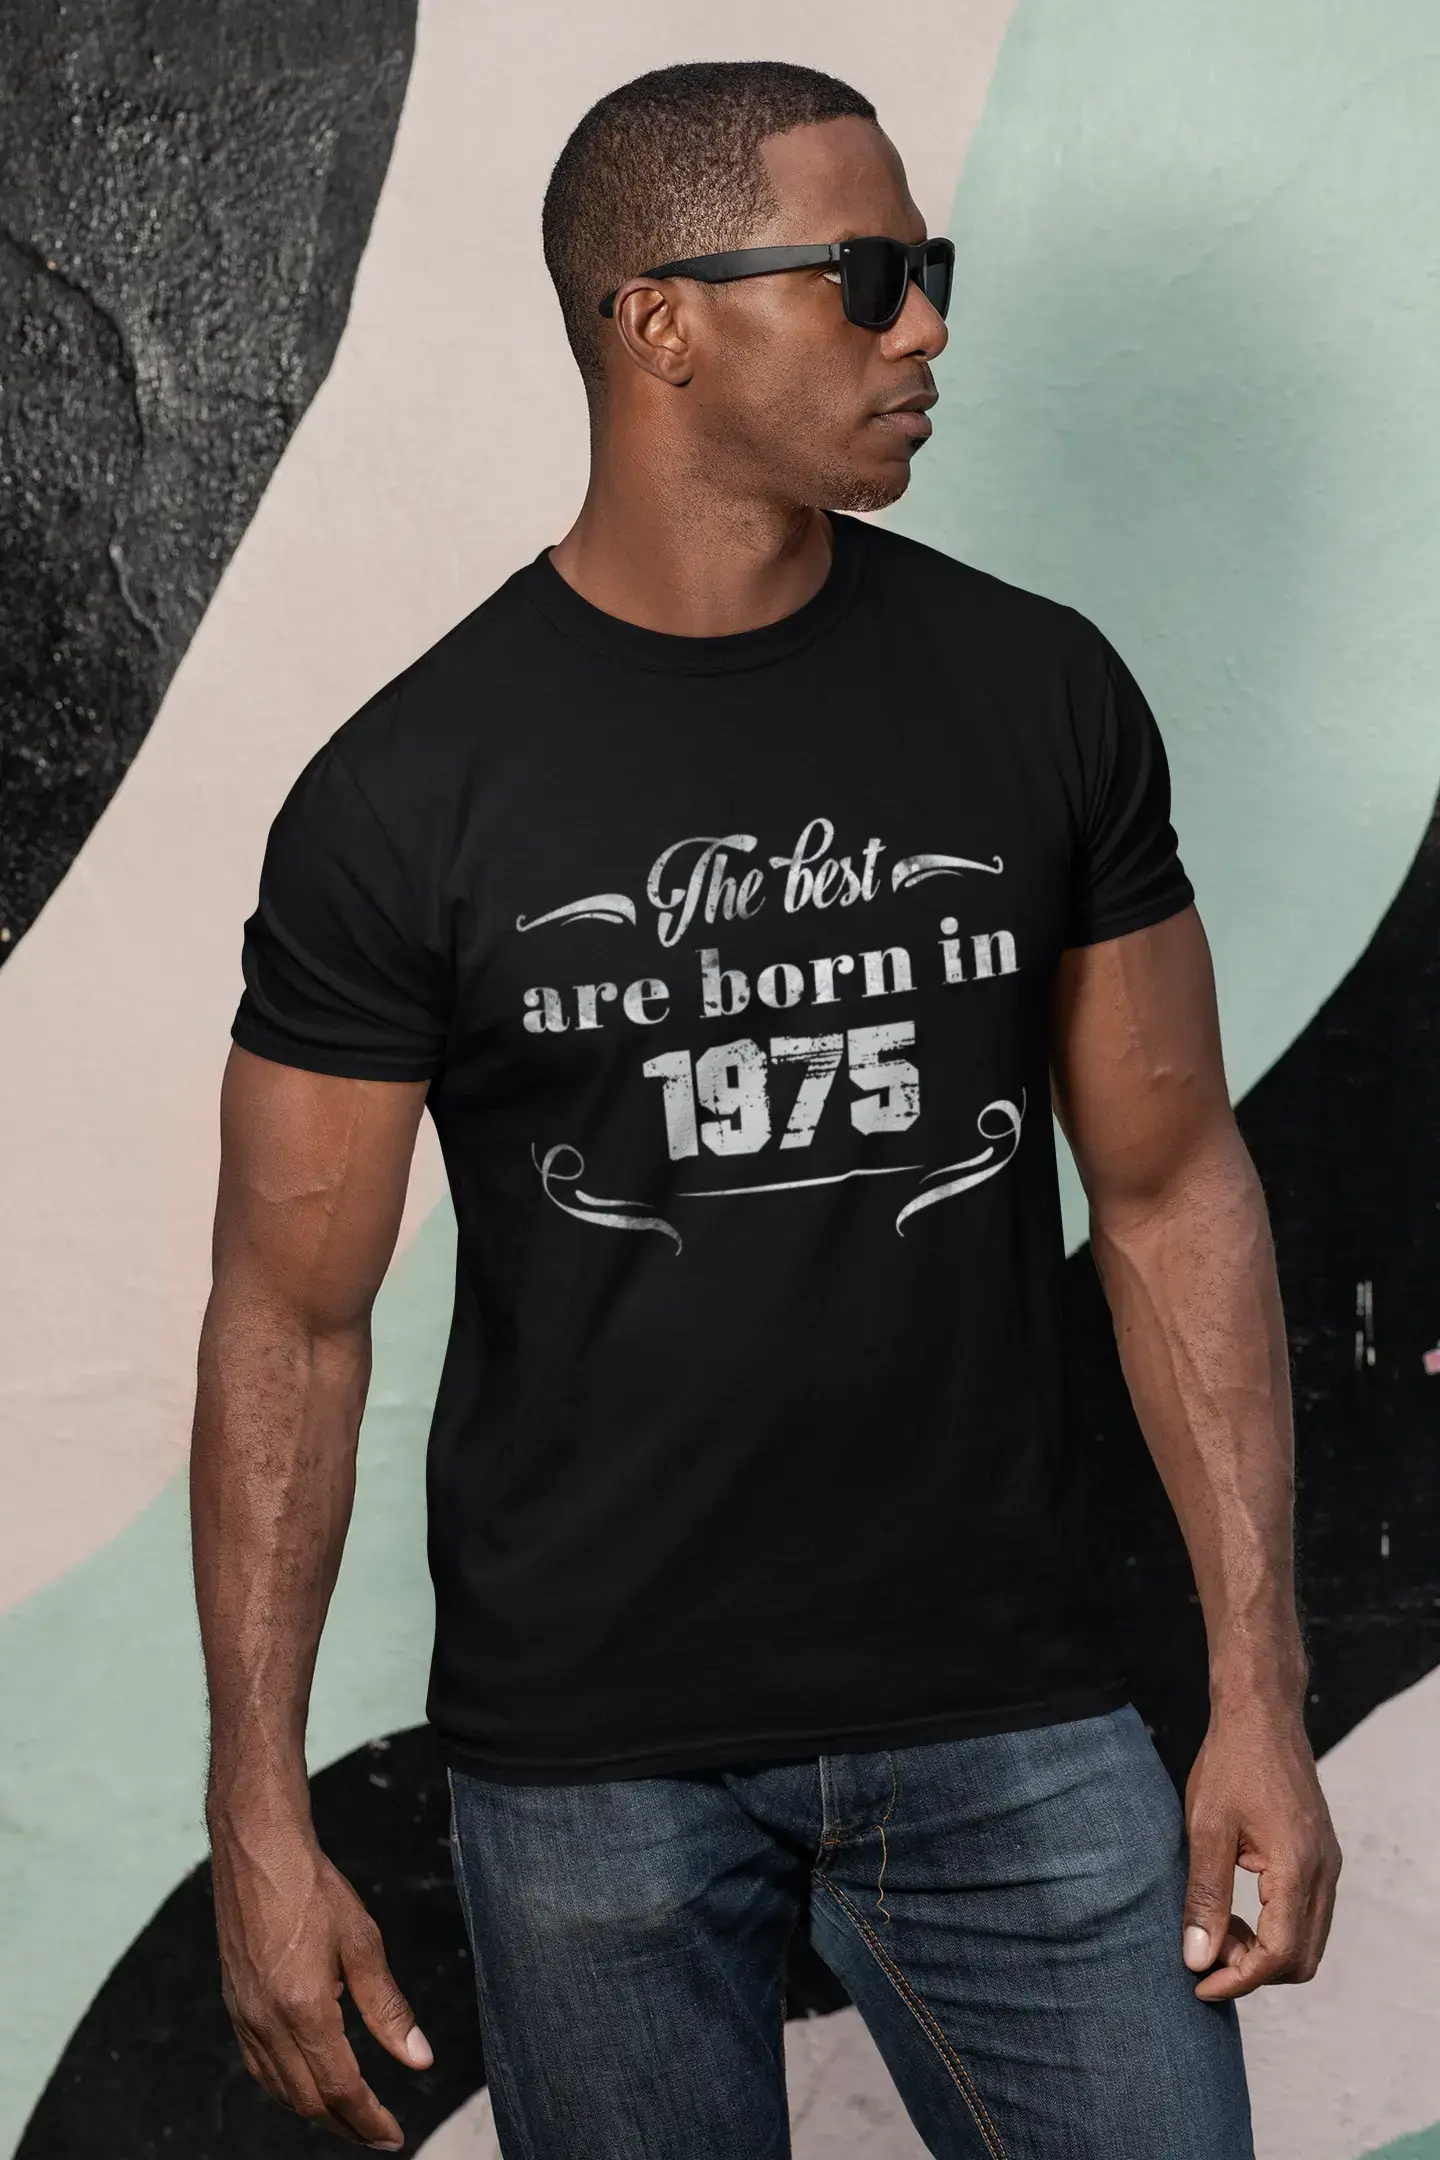 The Best are Born in 1975 Men's T-shirt Black Birthday Gift 00397